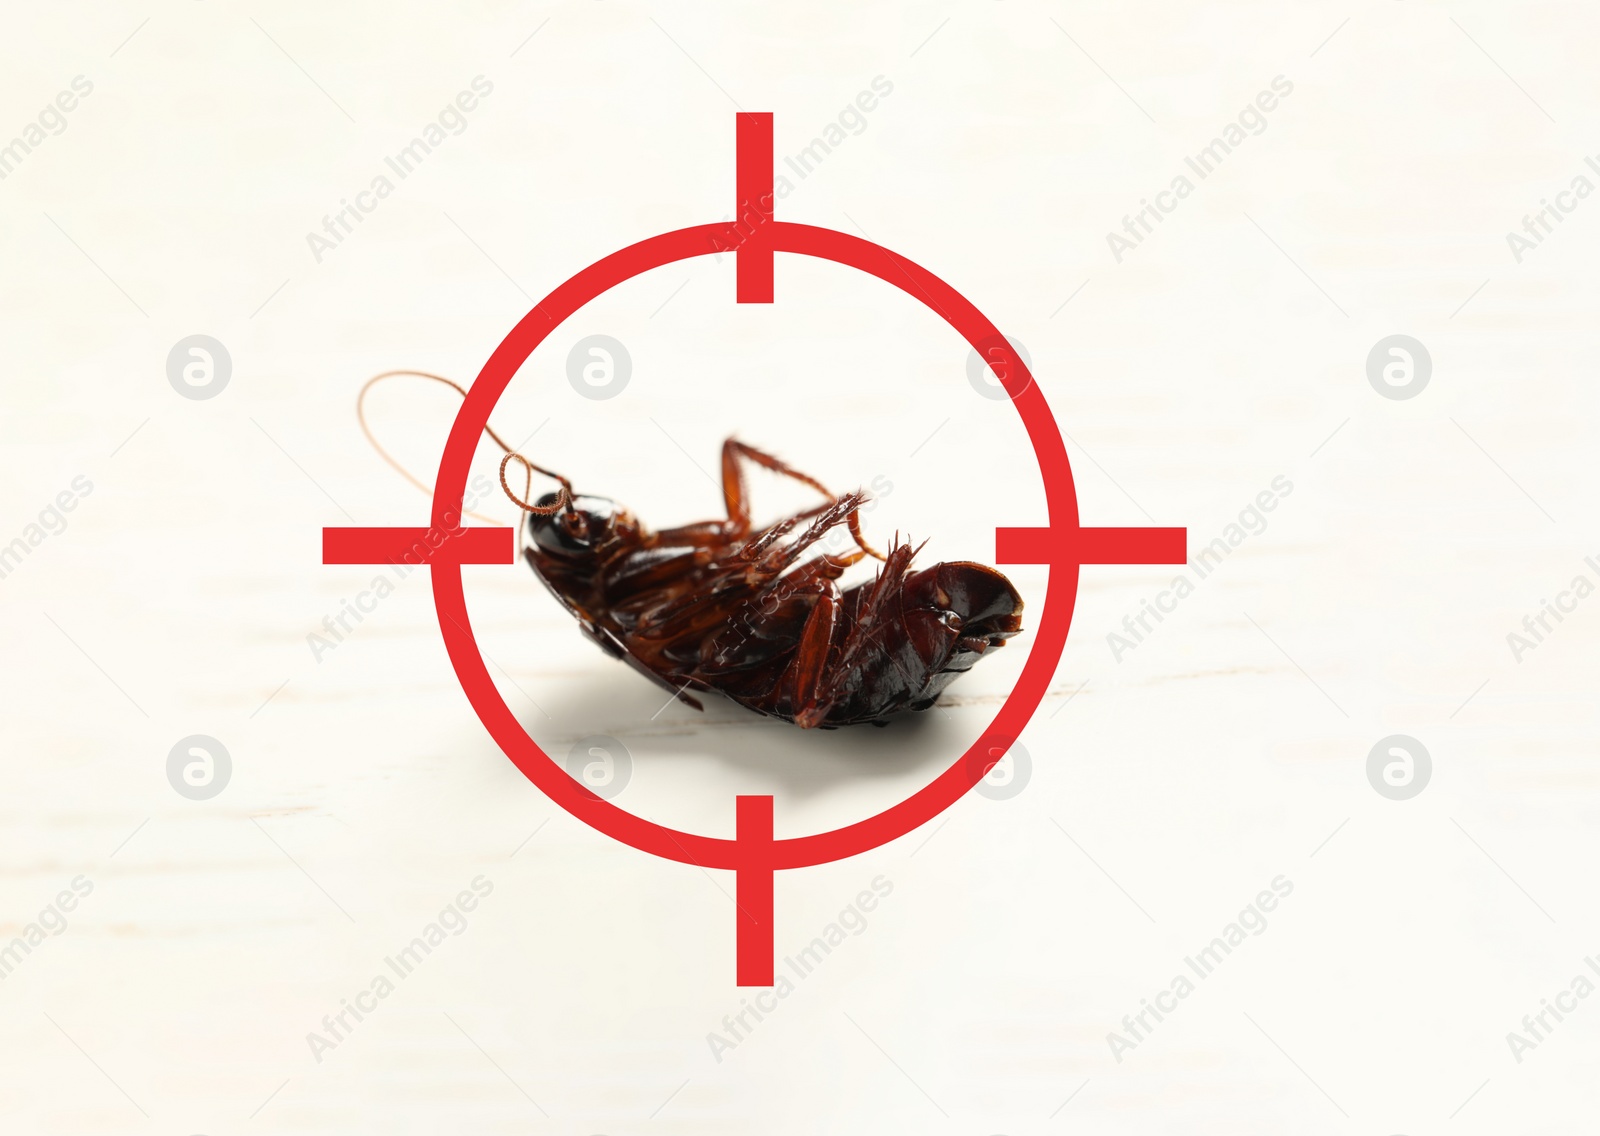 Image of Dead cockroach with red target symbol on white surface. Pest control